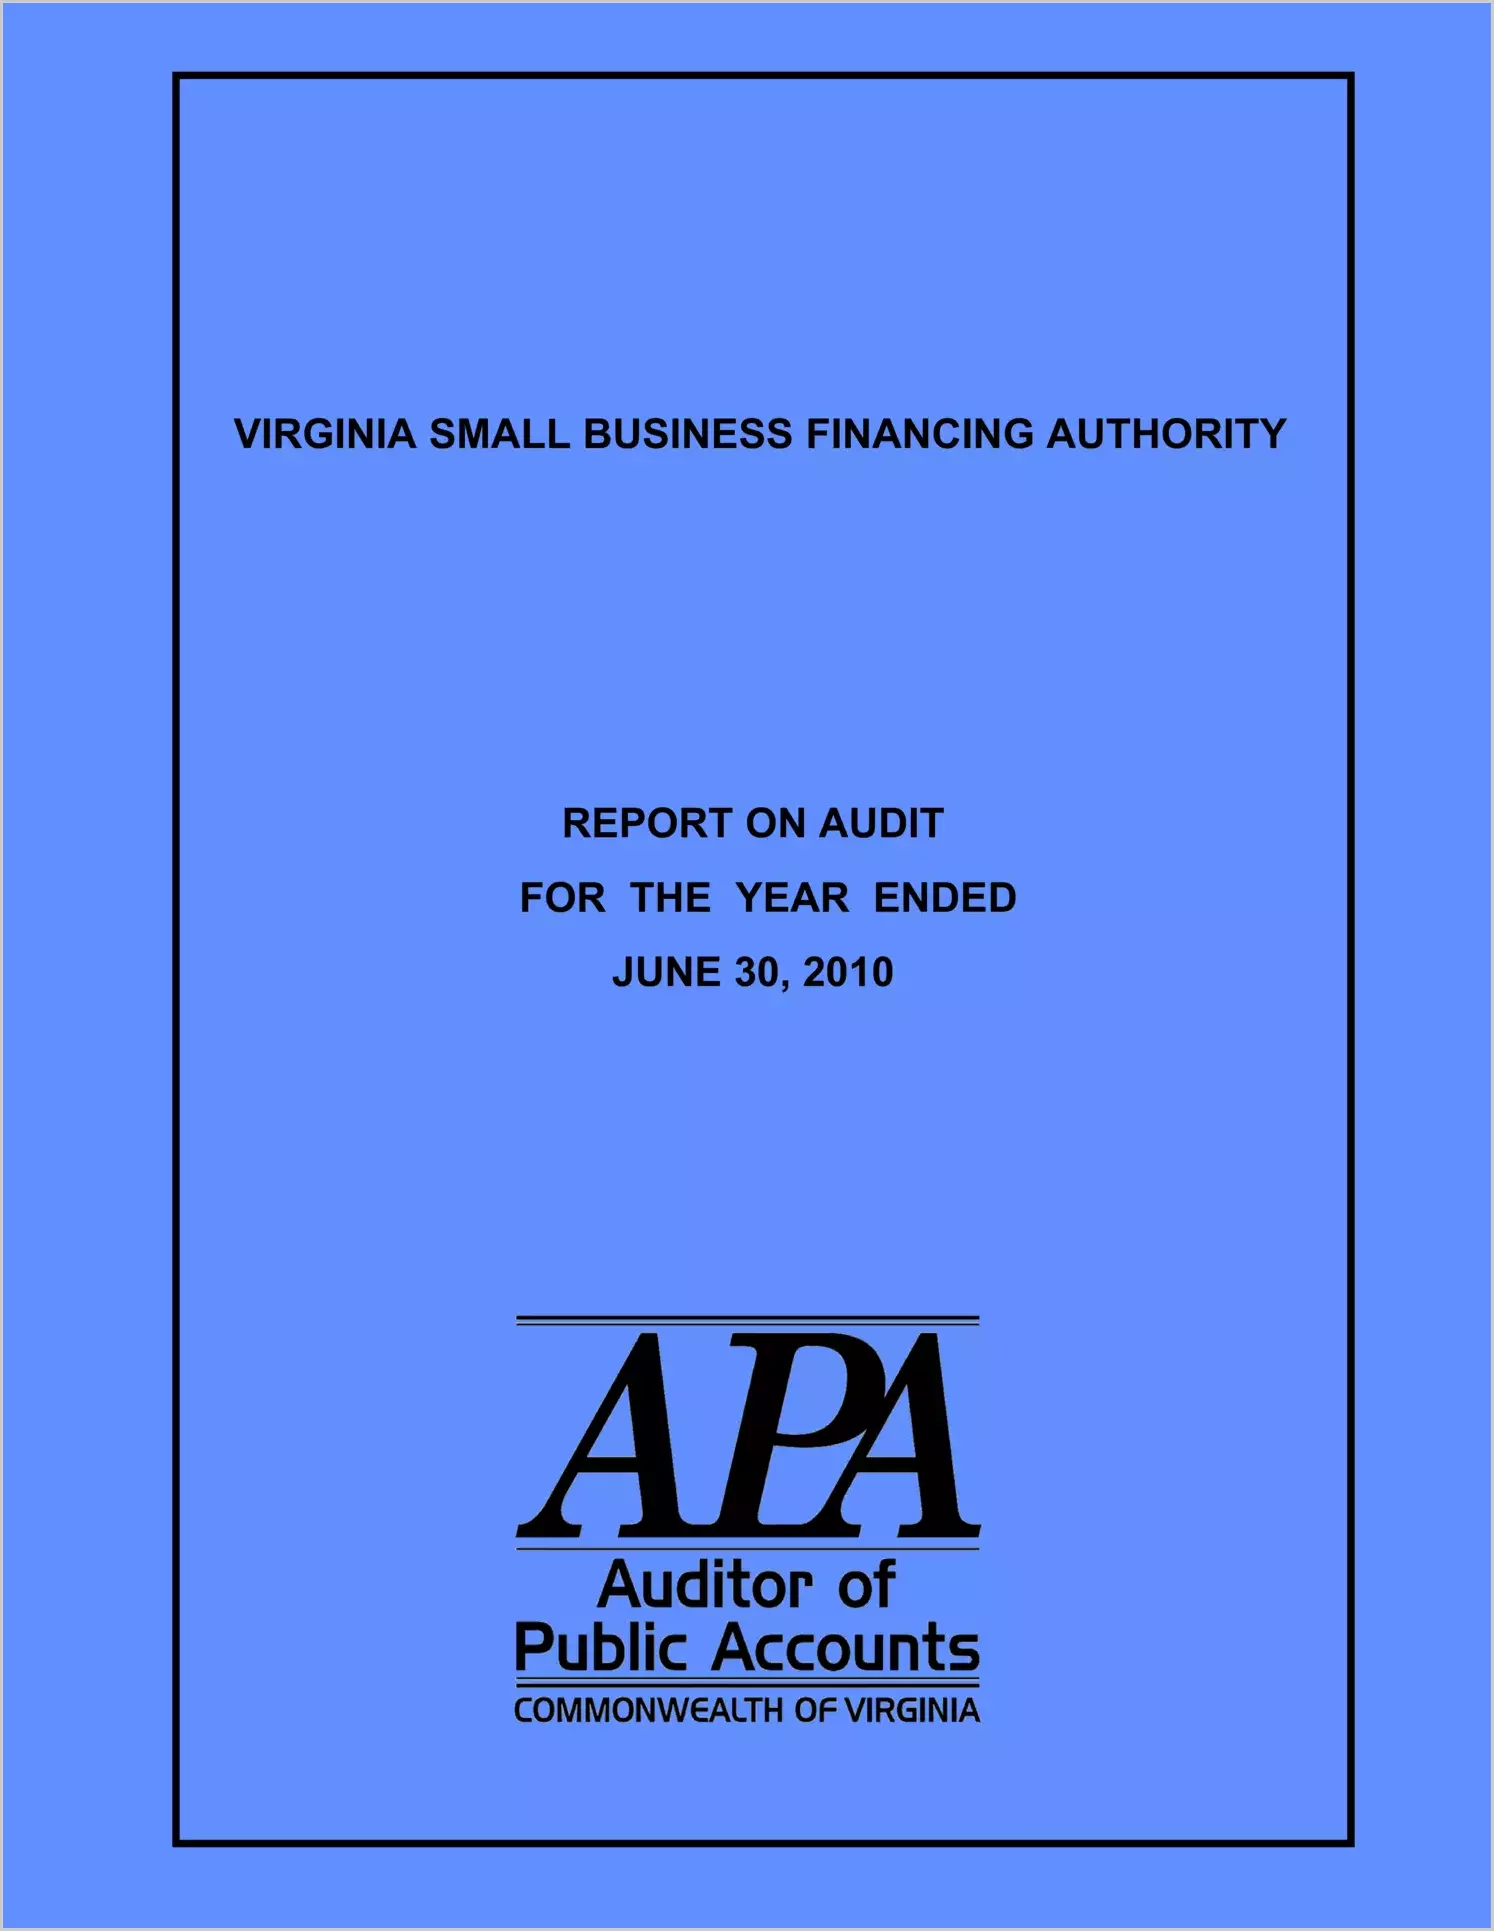 Virginia Small Business Financing Authority for the year ended June 30, 2010